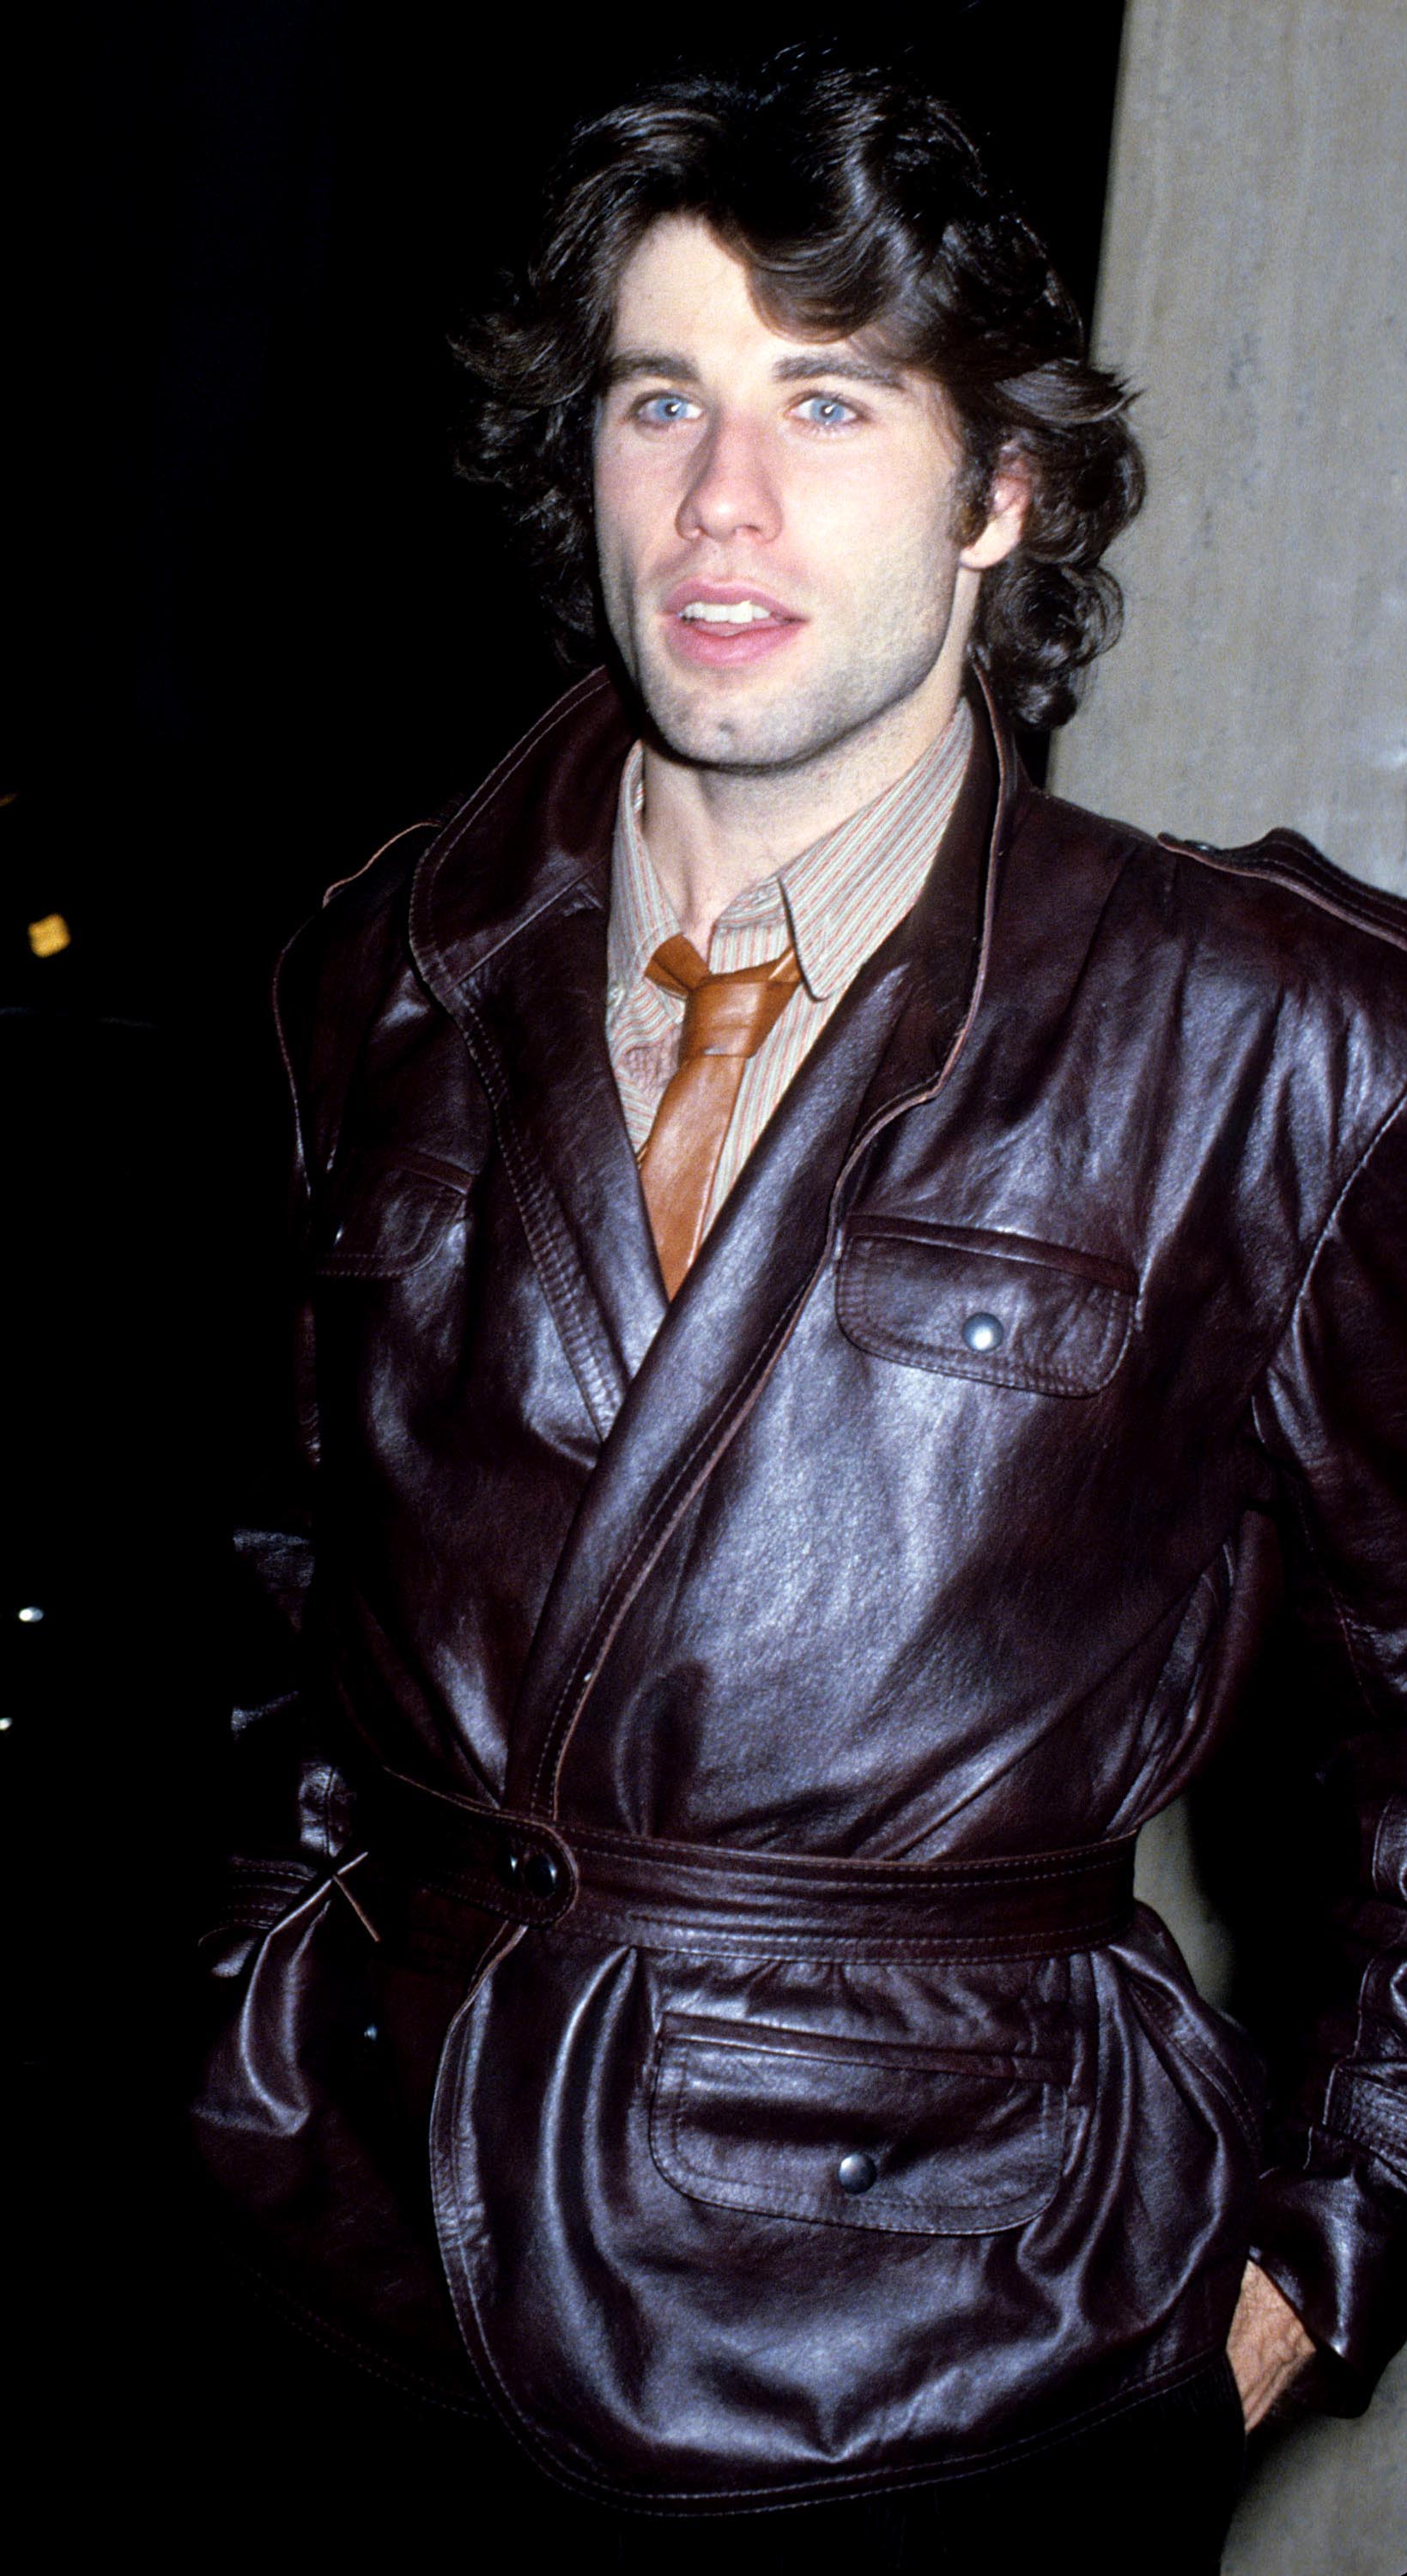 John Travolta spotted in London, England on December 5, 1978 | Source: Getty Images